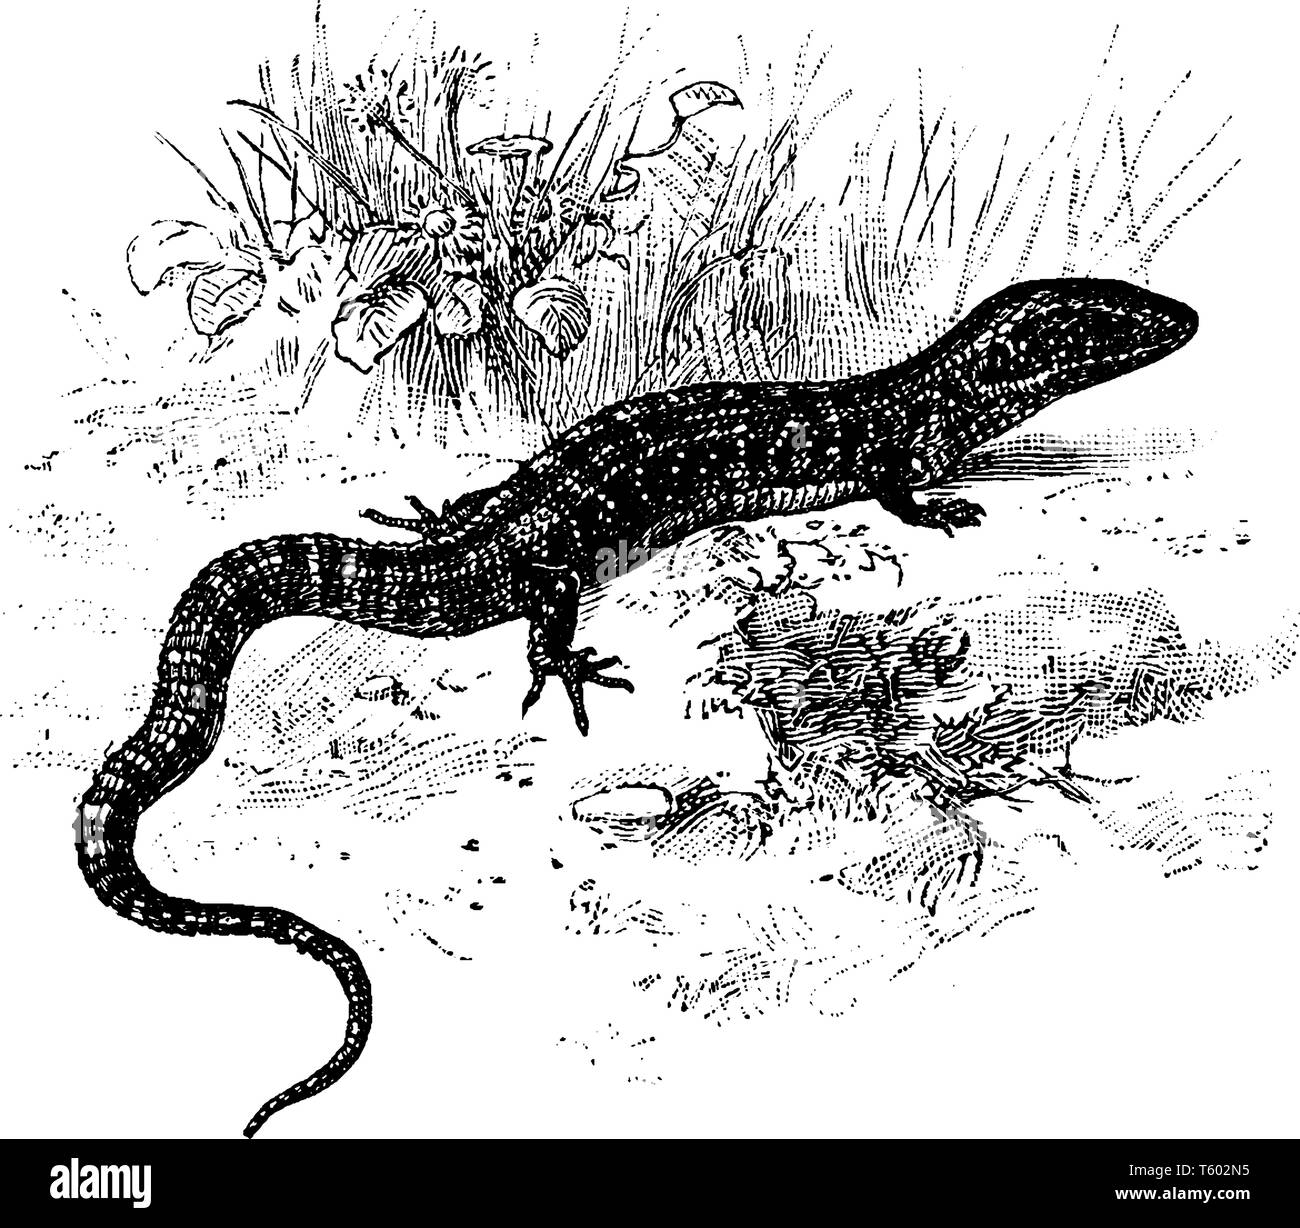 Northern Alligator Lizard is a lizard in the Anguidae family that was also known as the synonym Gerrhonotus coeruleus, vintage line drawing or engravi Stock Vector